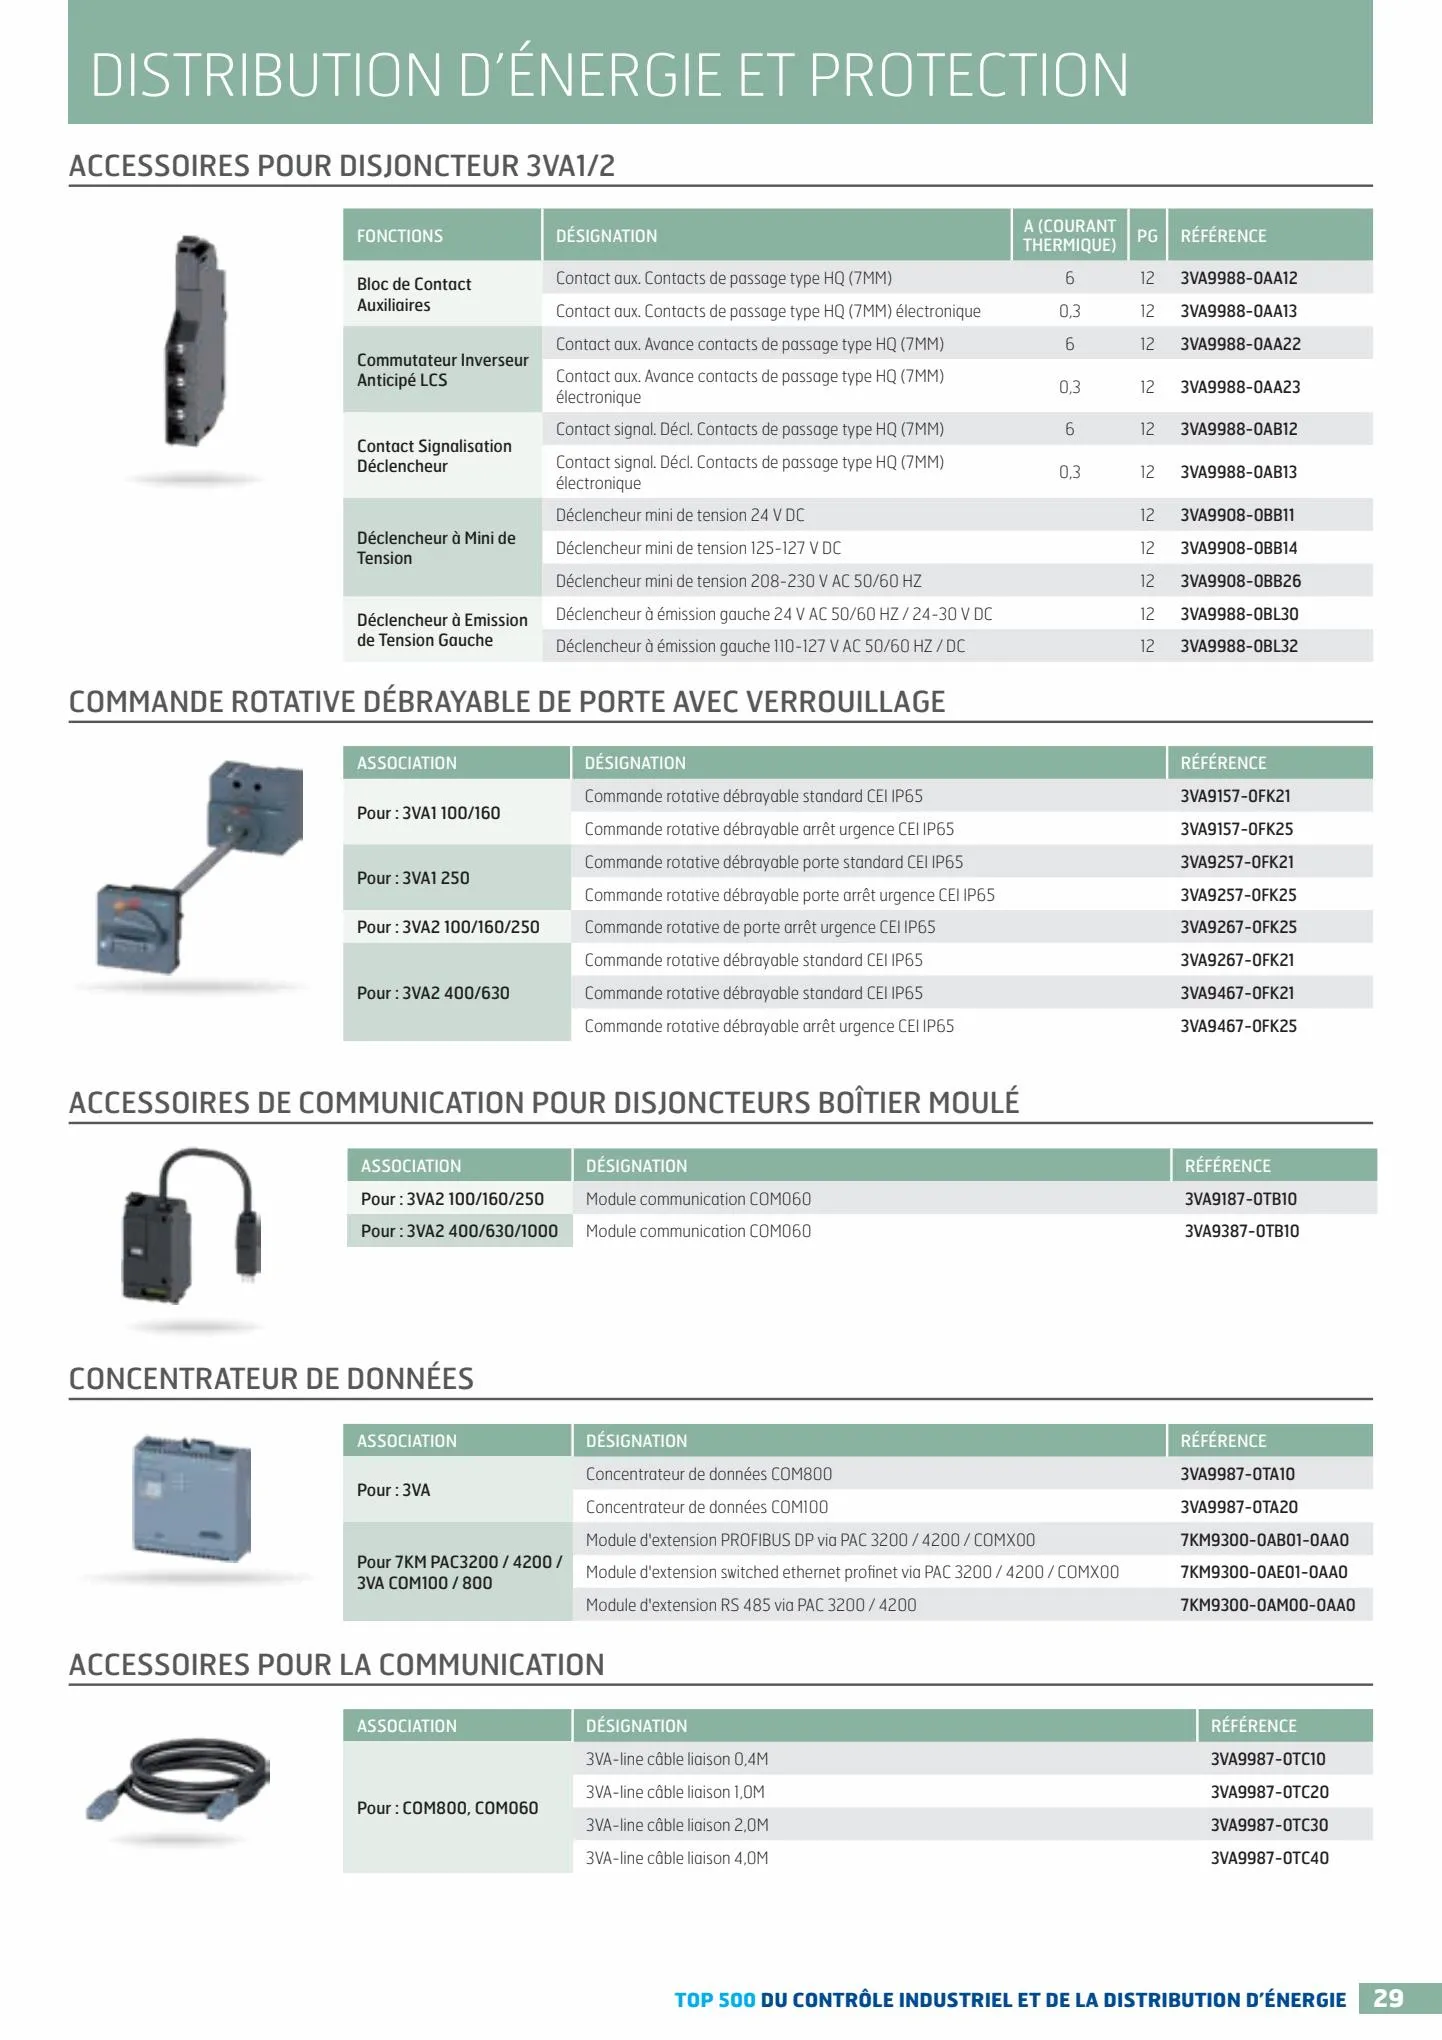 Catalogue TOP 500 siemens, page 00029